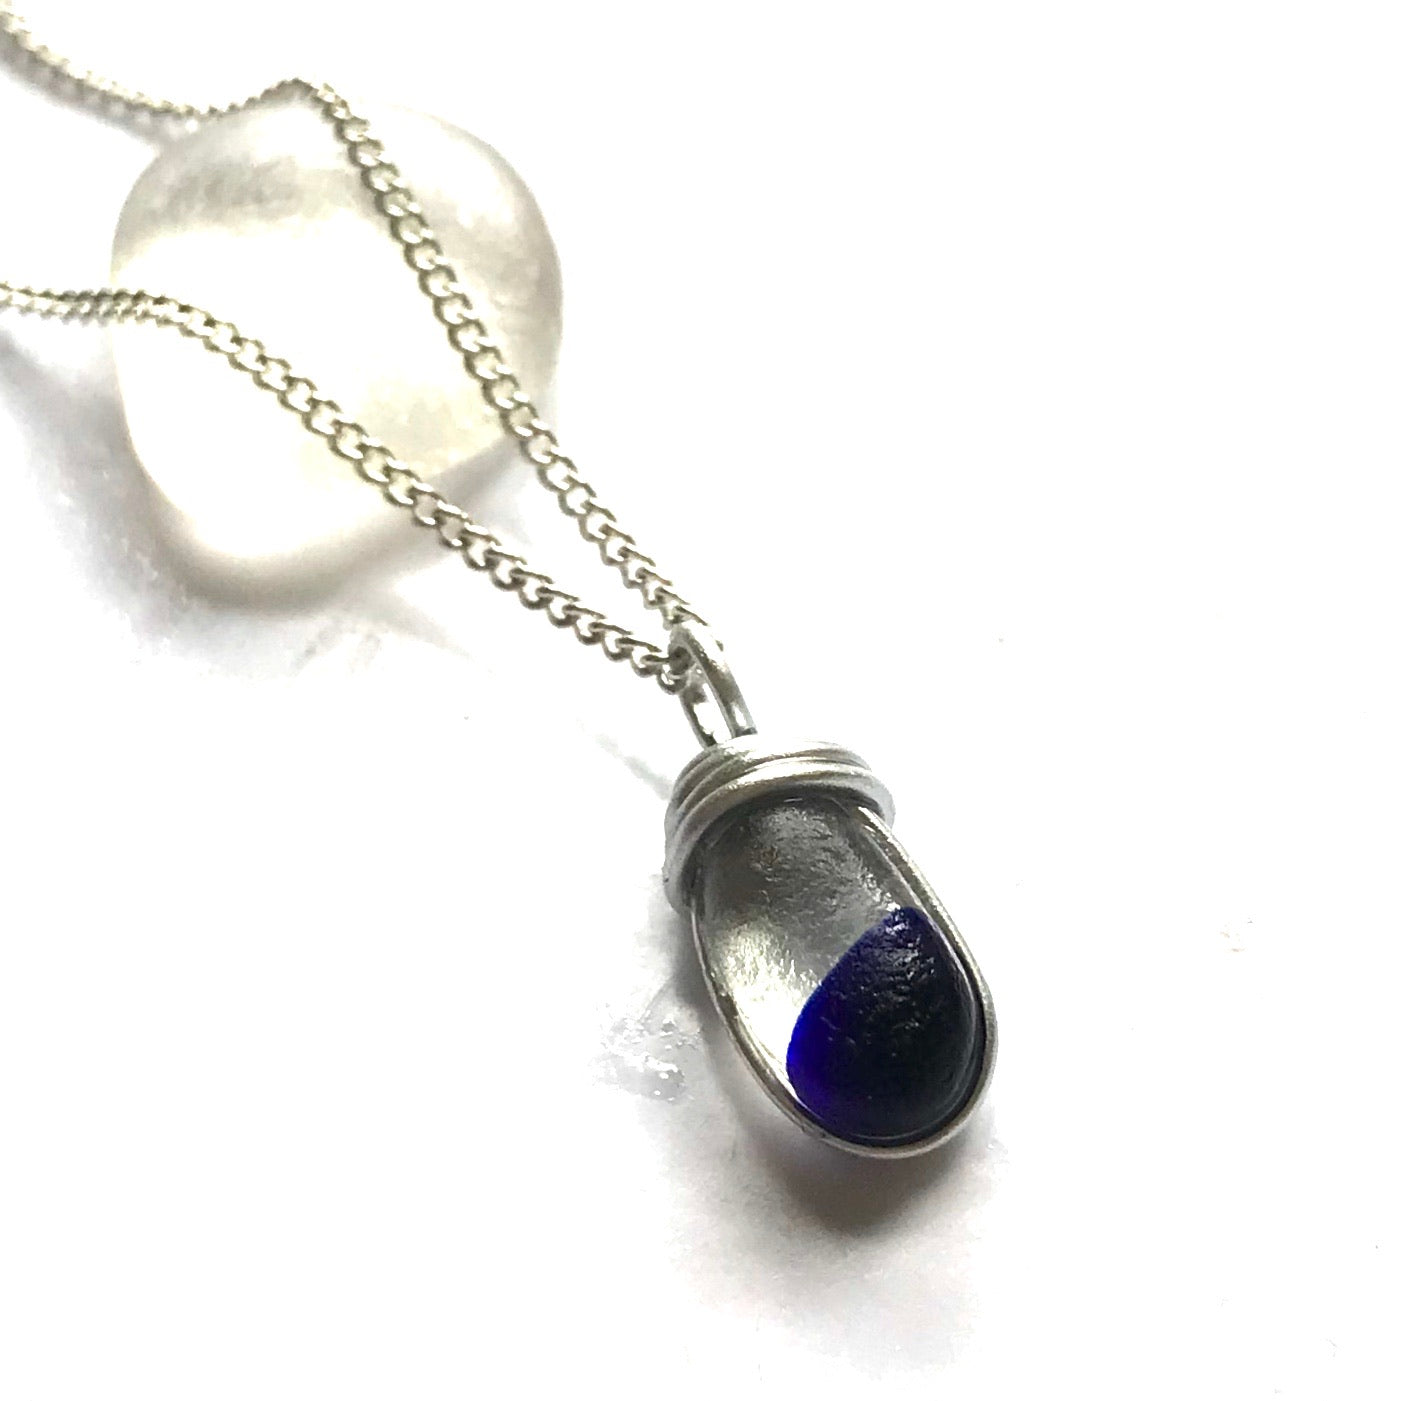 Deep Blue Spot Sea Glass Pendant on a Sterling Silver Chain